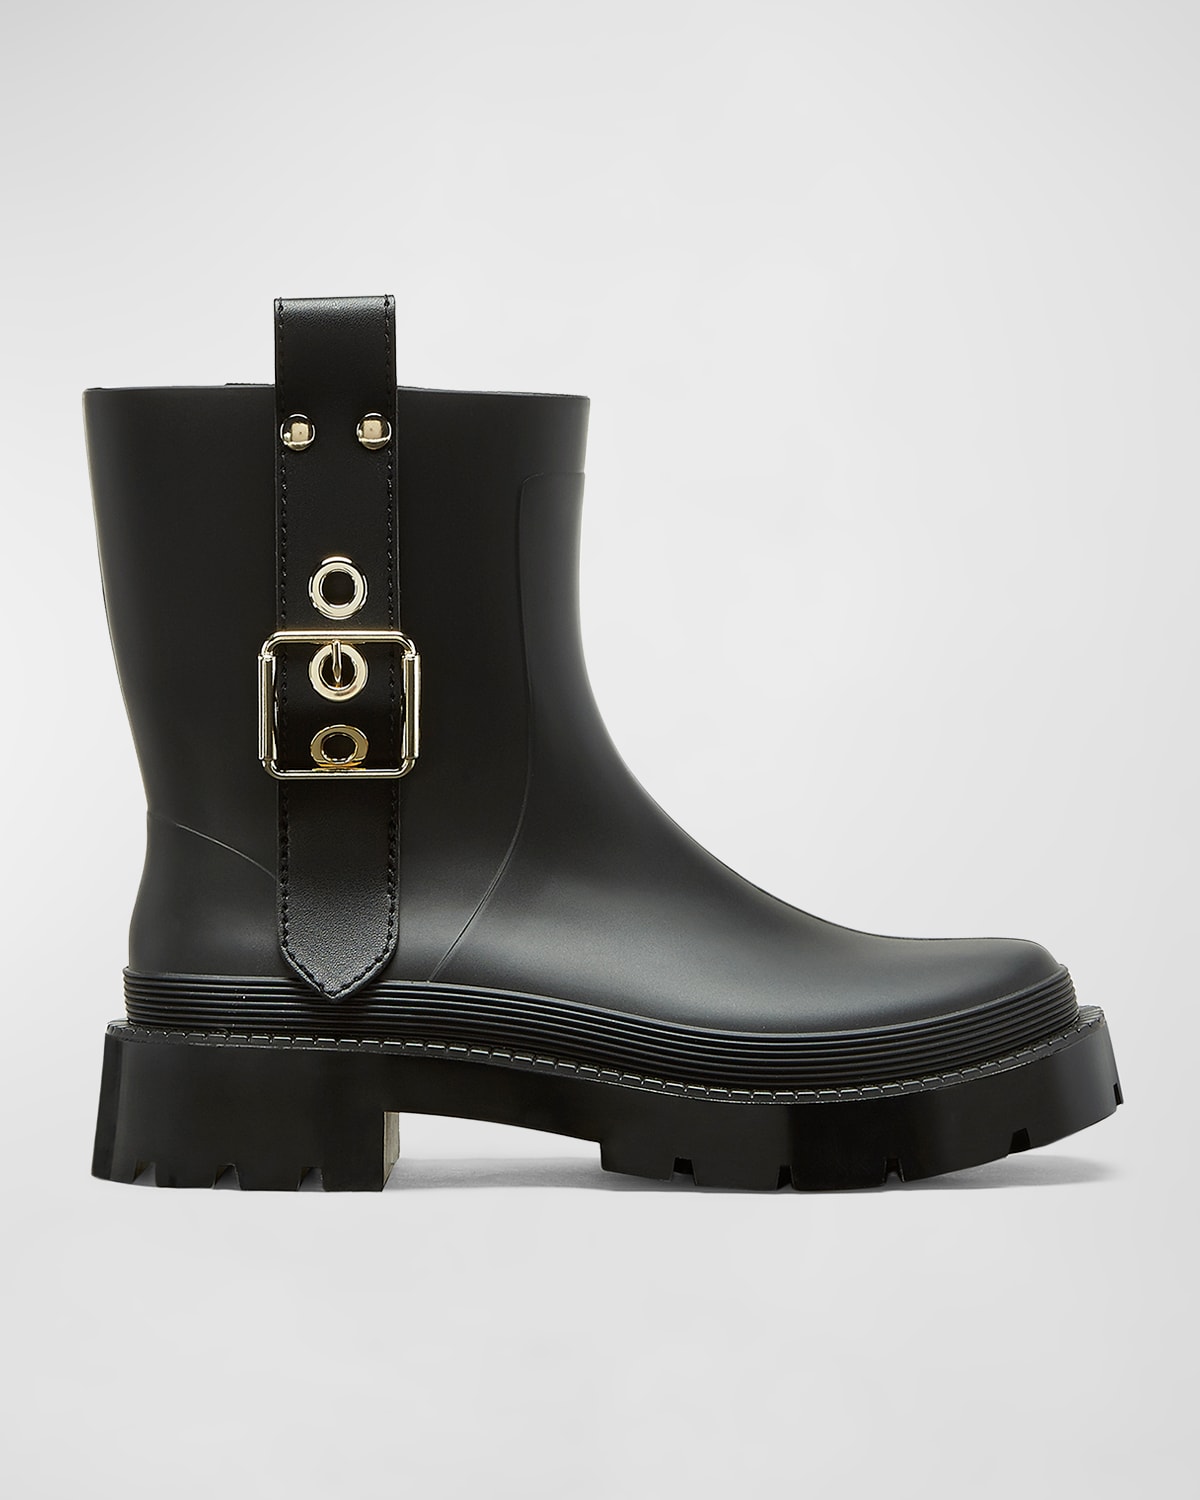 La Canadienne Puddle Chic Belted Moto Rain Boots